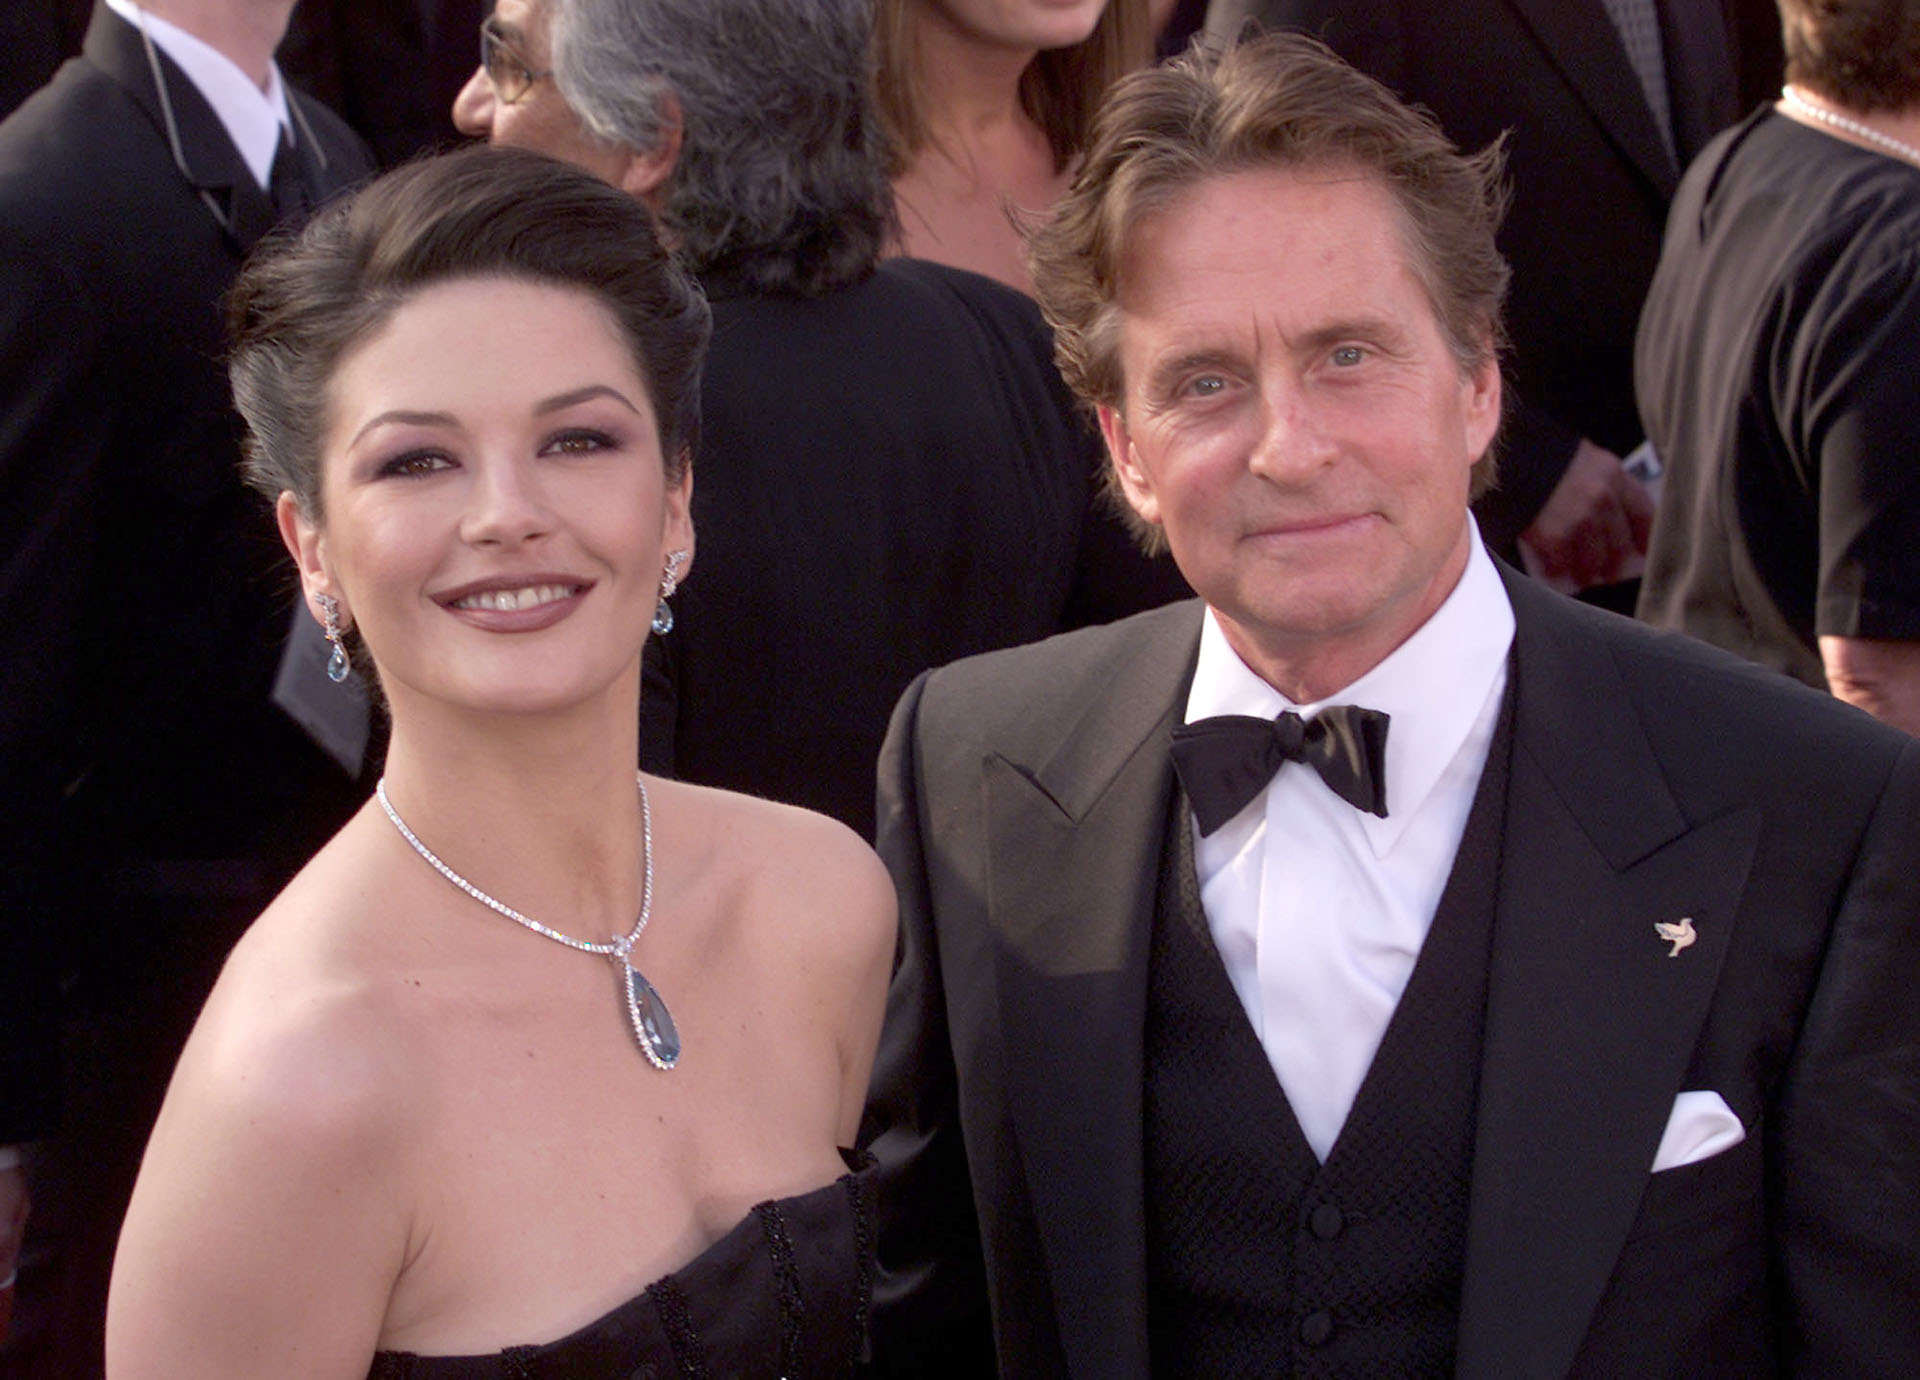 Catherine Zeta-Jones (left) and husband Michael Douglas, who co-starred in the nominee for the Best Motion Picture Of The Year, Traffic,  arrive at the 73rd Annual Academy Awards ceremony at the Shrine Auditorium in Los Angeles, CA on March 25, 2001. Photo credit: Kevin Winter/Getty Images